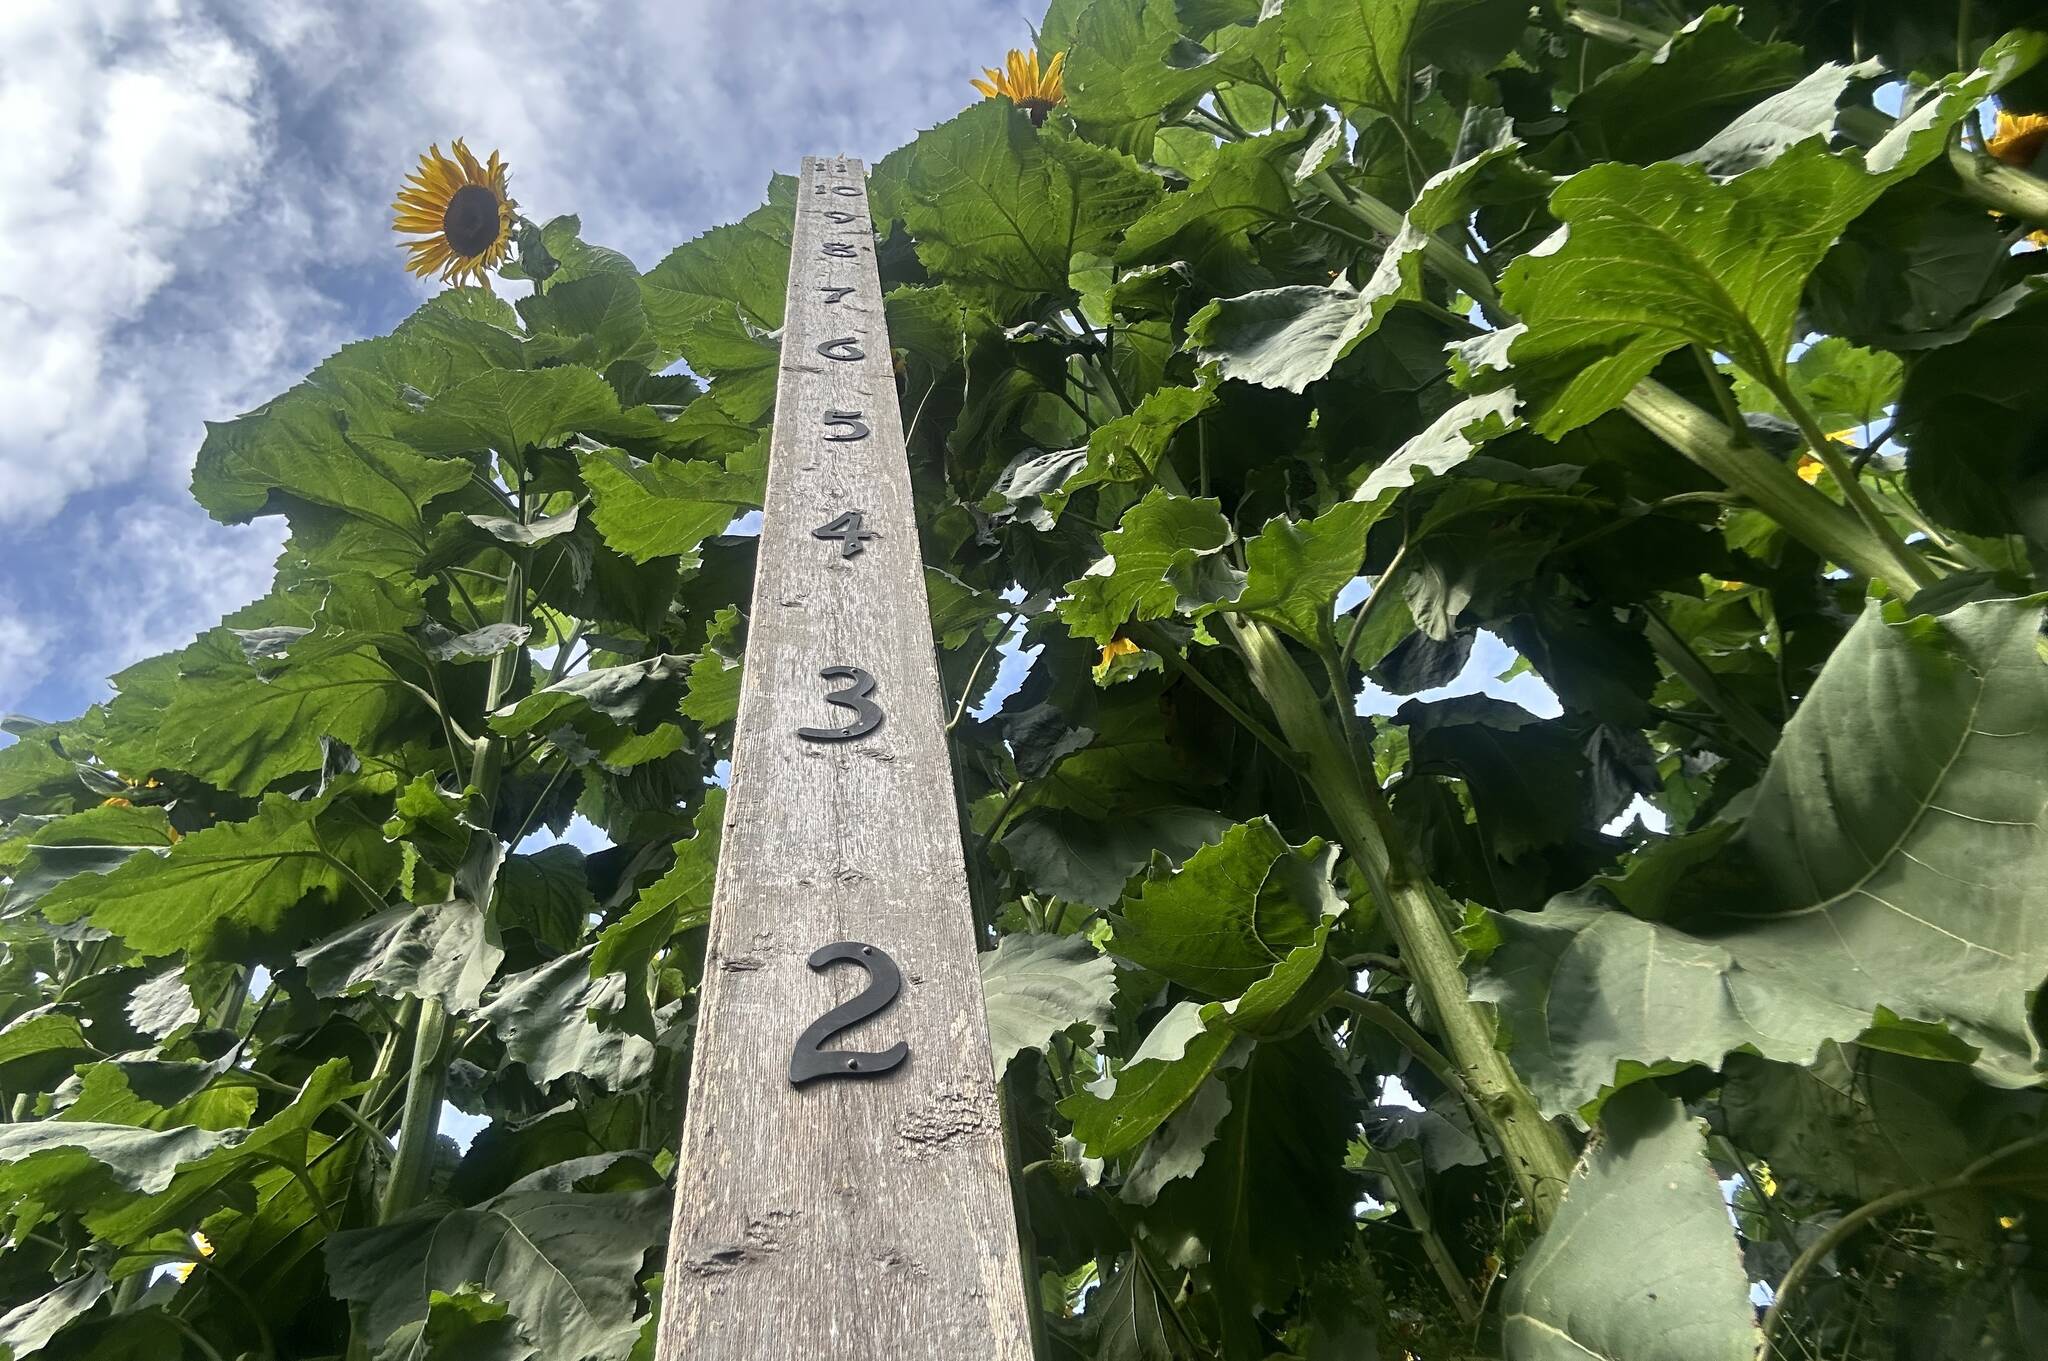 Some of the giant sunflowers at the Harrison Sunflower Festival have grown to be more than 11 feet tall. (Adam Louis/Observer)